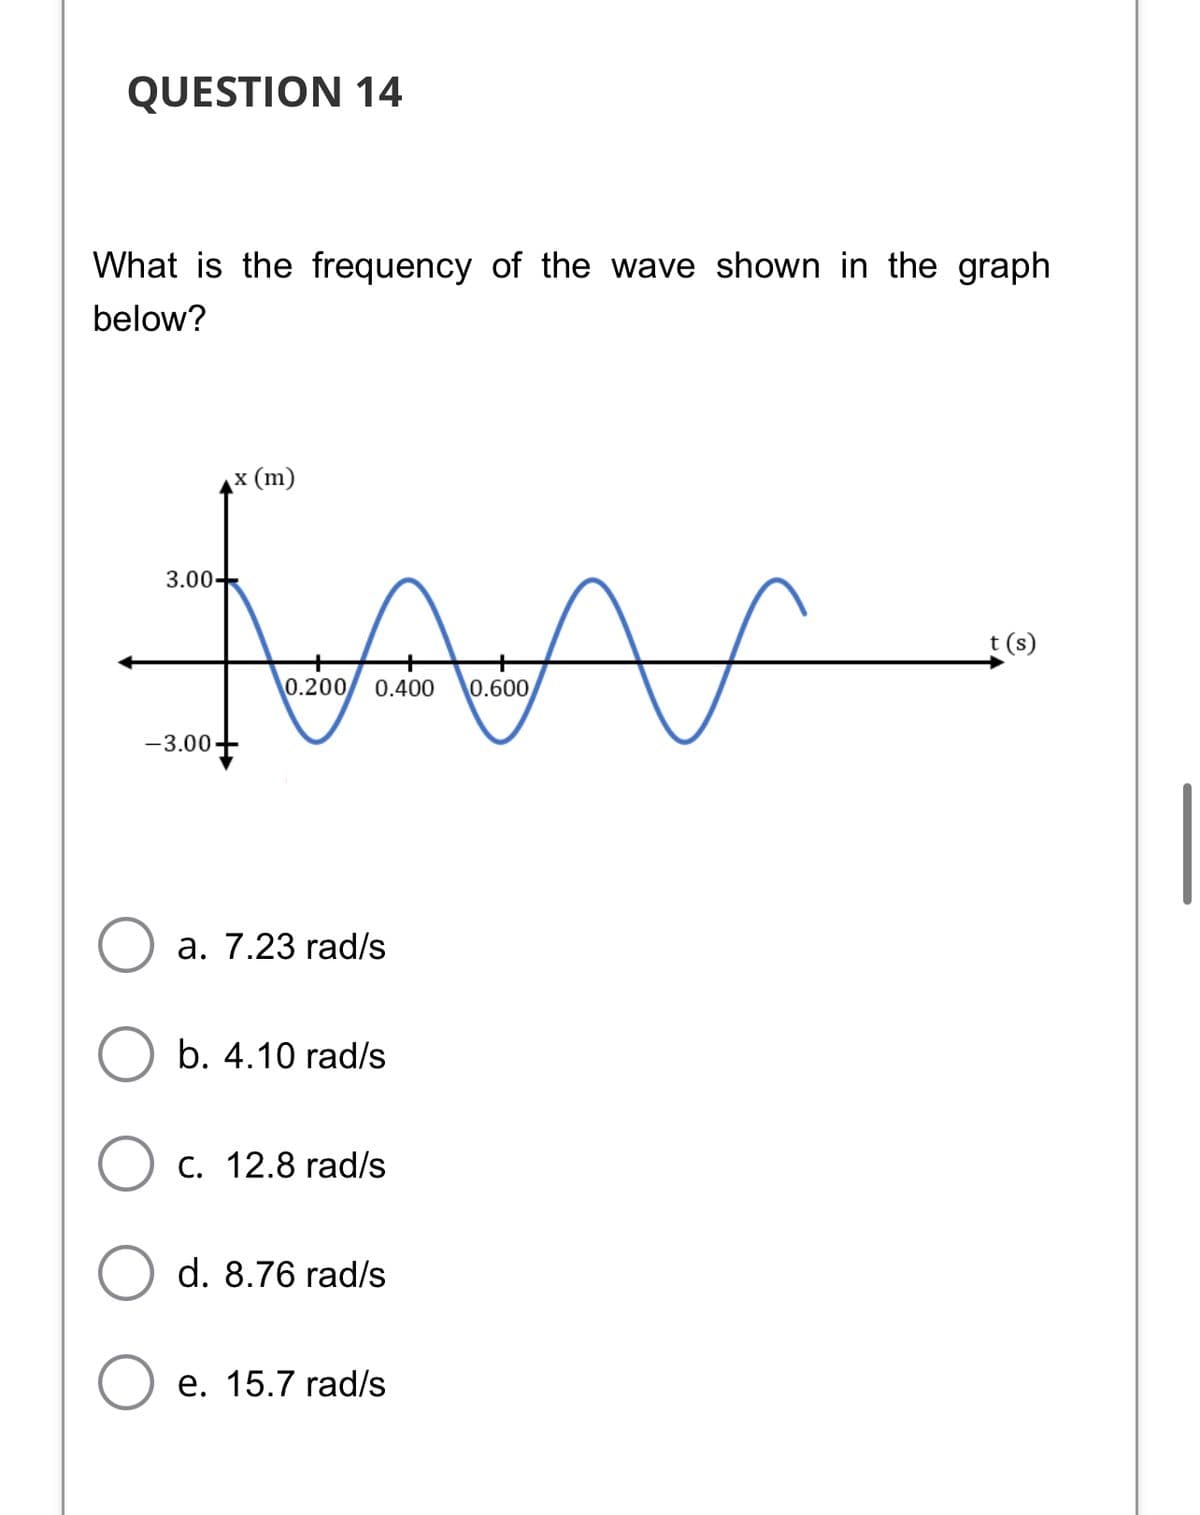 QUESTION 14
What is the frequency of the wave shown in the graph
below?
(ш) х\
3.00+
t (s)
0.200
0.400
0.600
-3.00
а. 7.23 rad/s
b. 4.10 rad/s
C. 12.8 rad/s
d. 8.76 rad/s
е. 15.7rad/s
